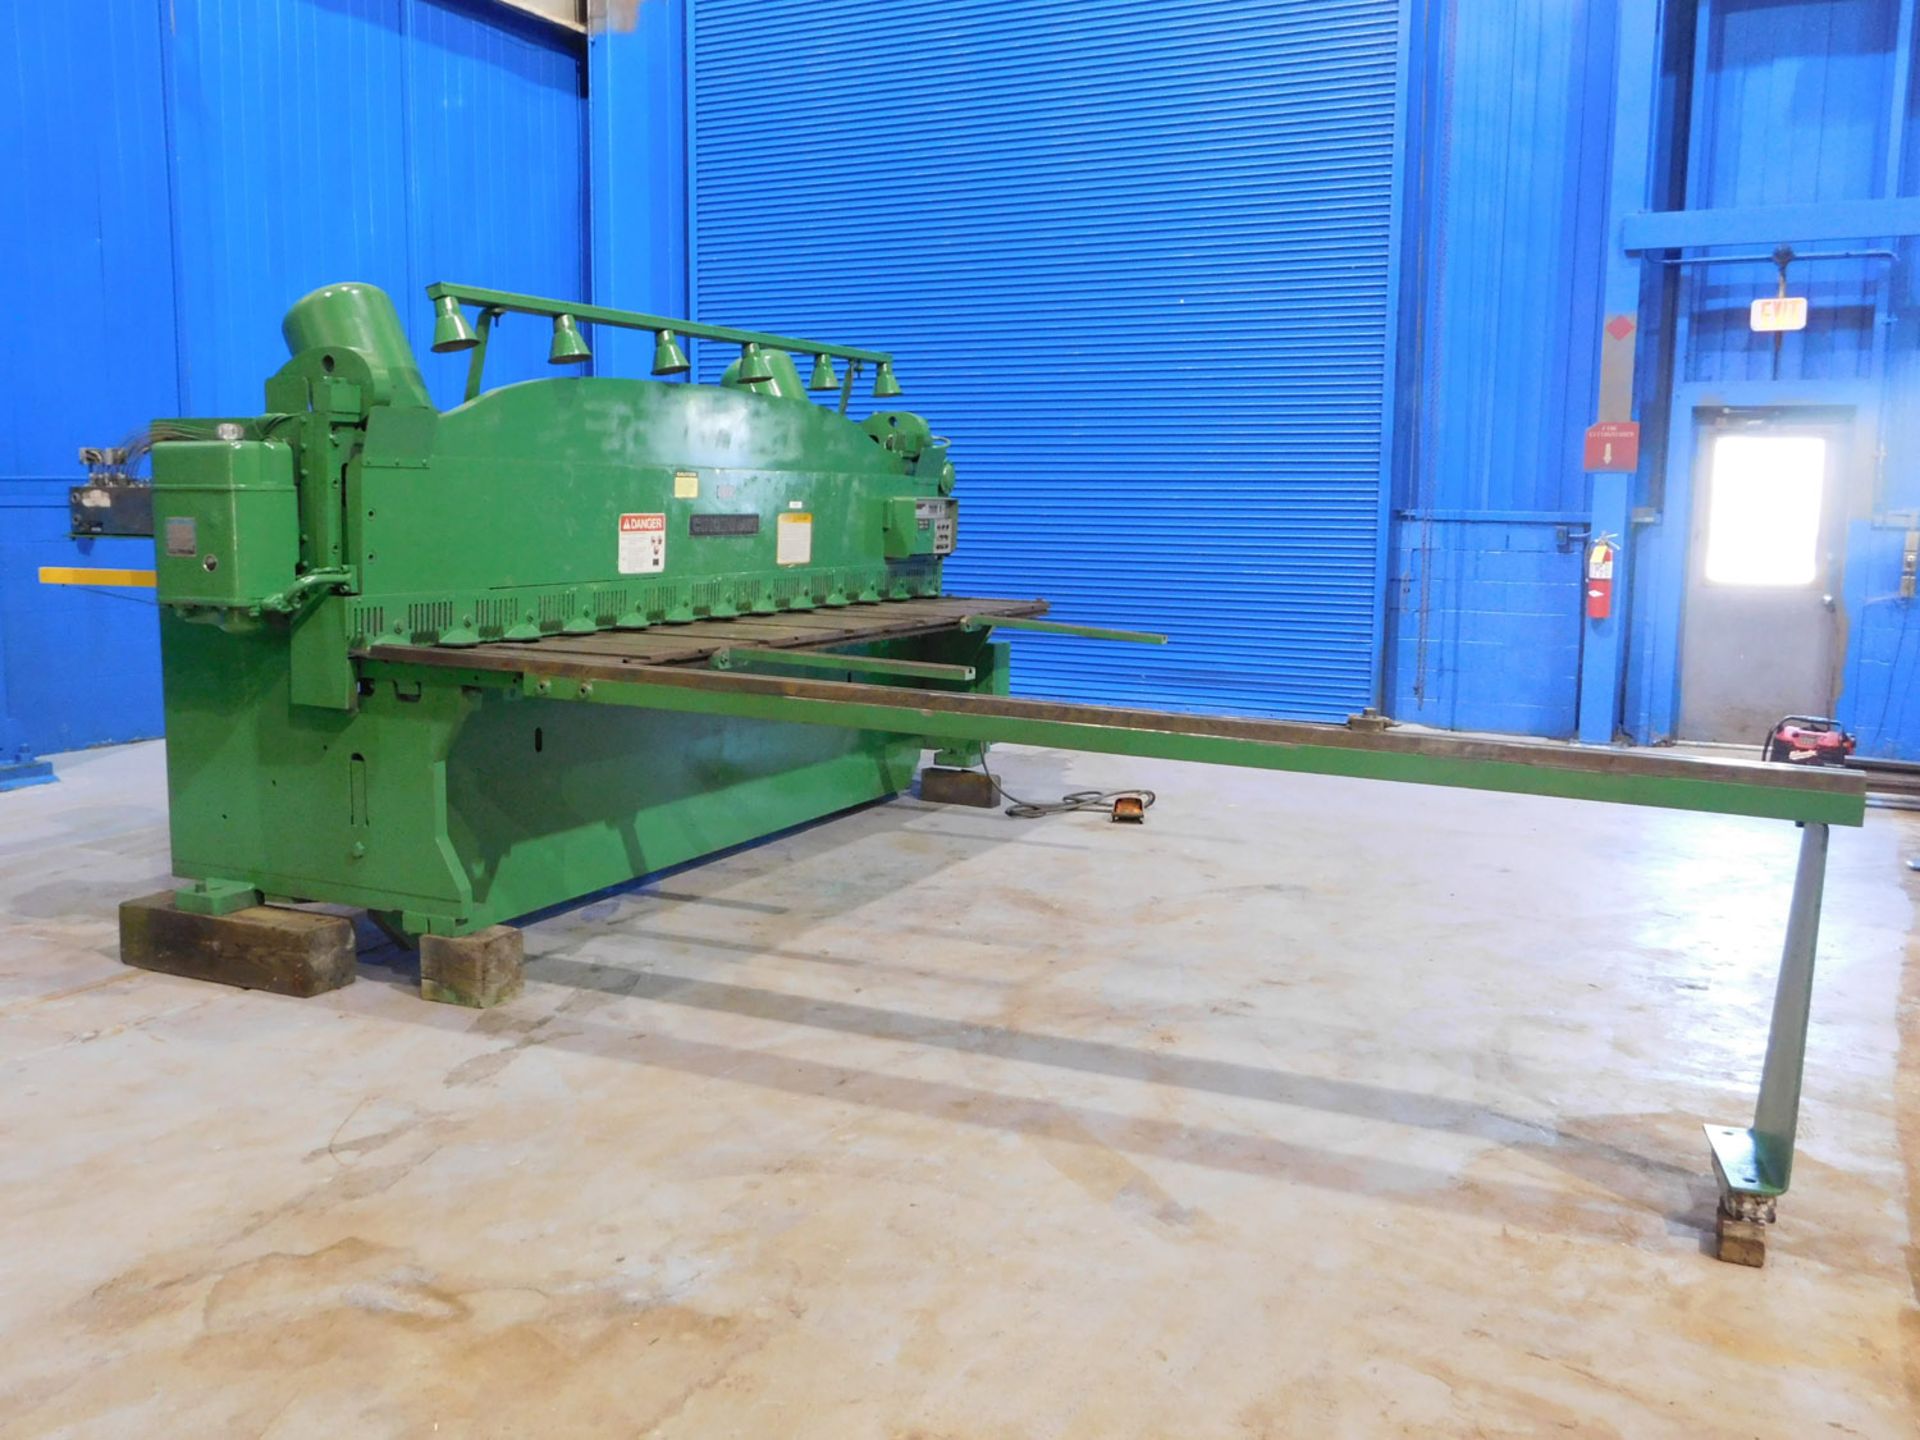 Cincinnati Power Shear, 1/4" x 12', Mdl: 2CC12, S/N: 44341 (5991P) (Located In Painesville, OH) - Image 4 of 8